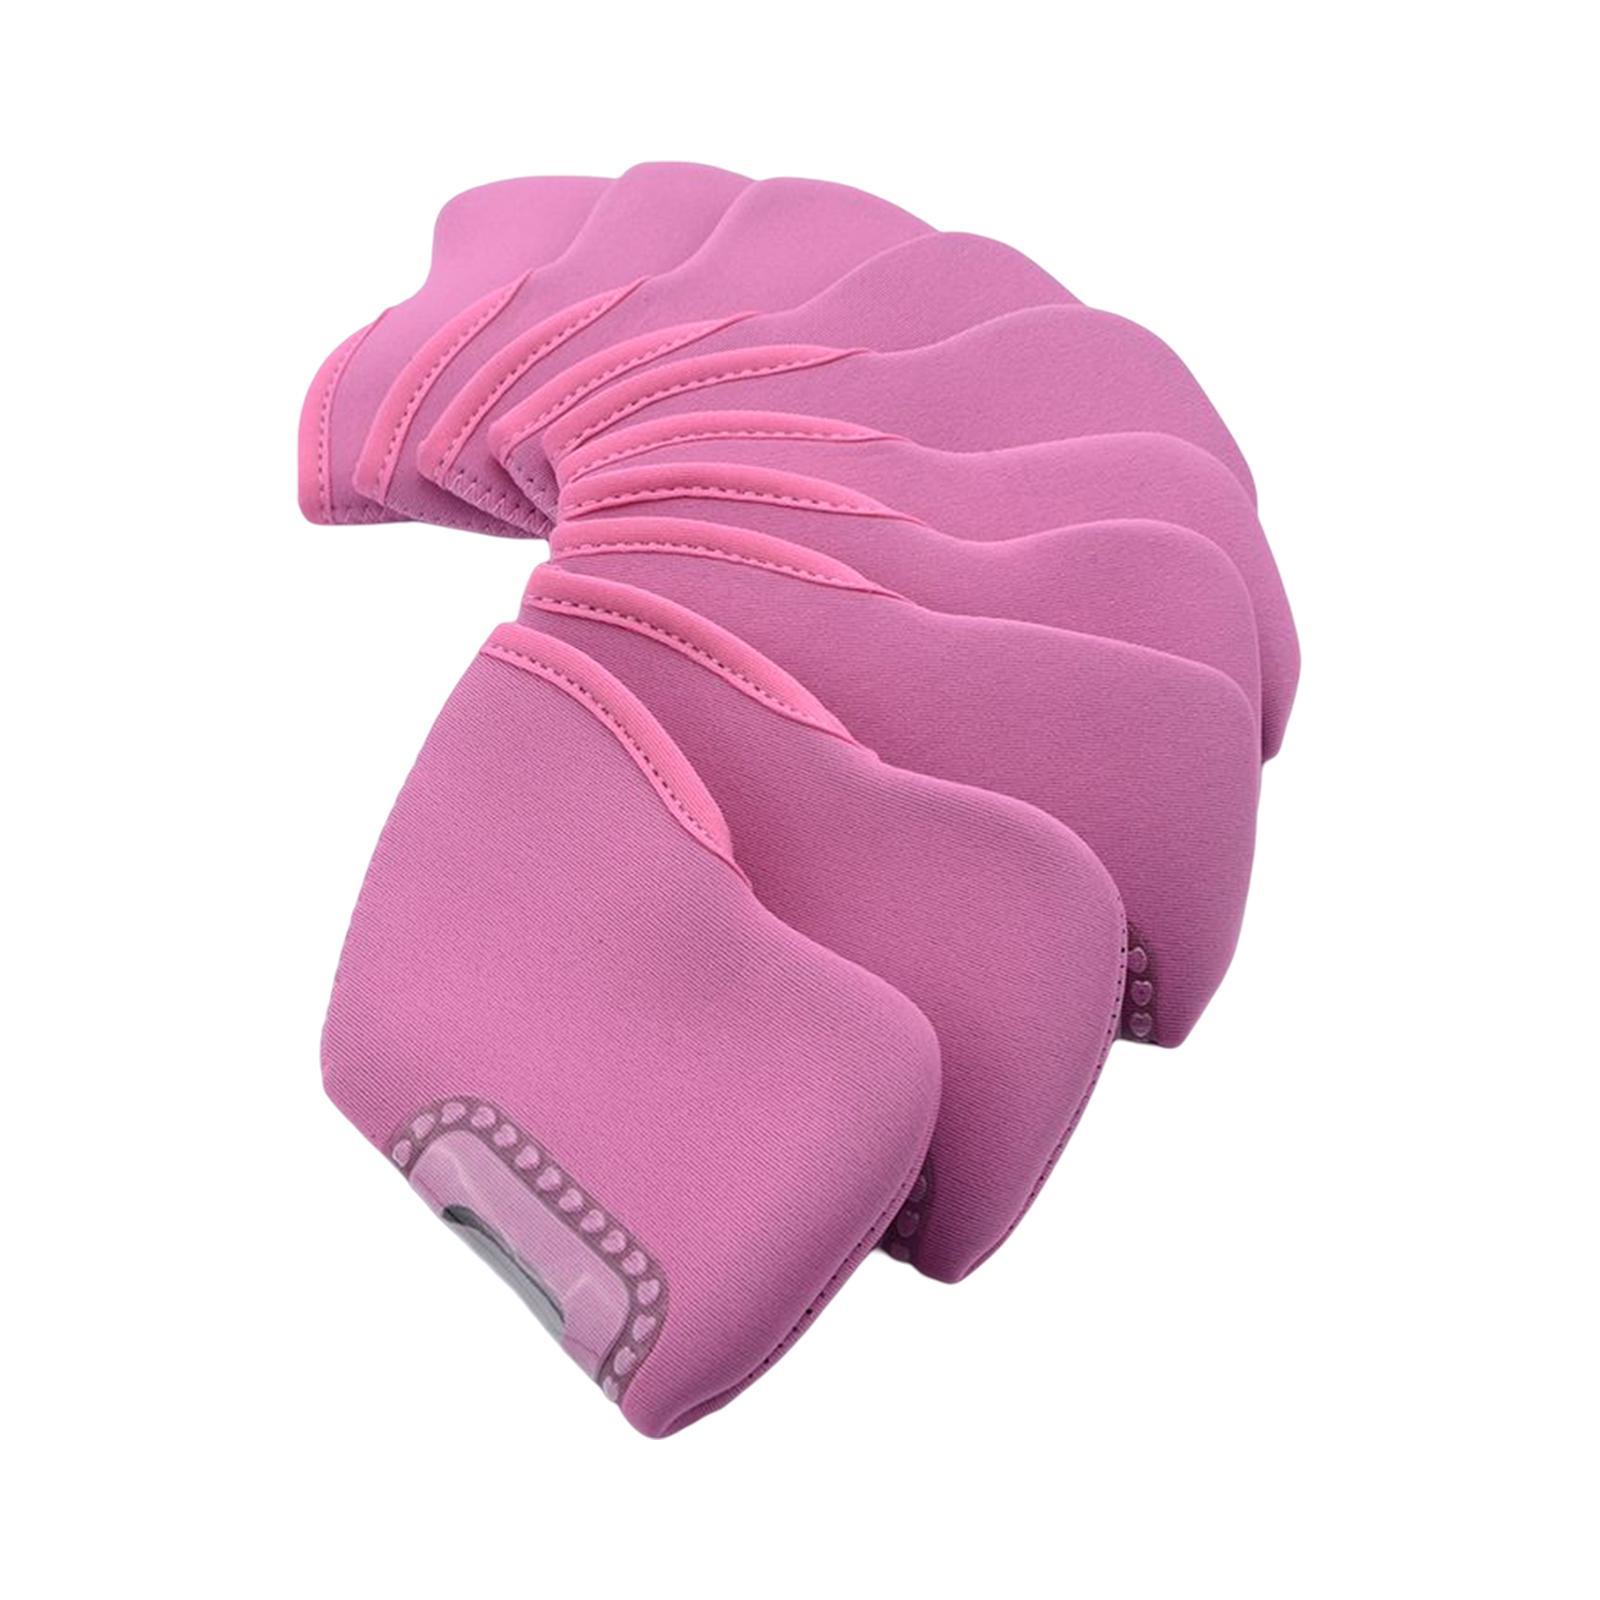 10Pcs Golf Iron Club Head Covers Golf Headcover Waterproof Golf Club Head Cover for Outdoor Sports